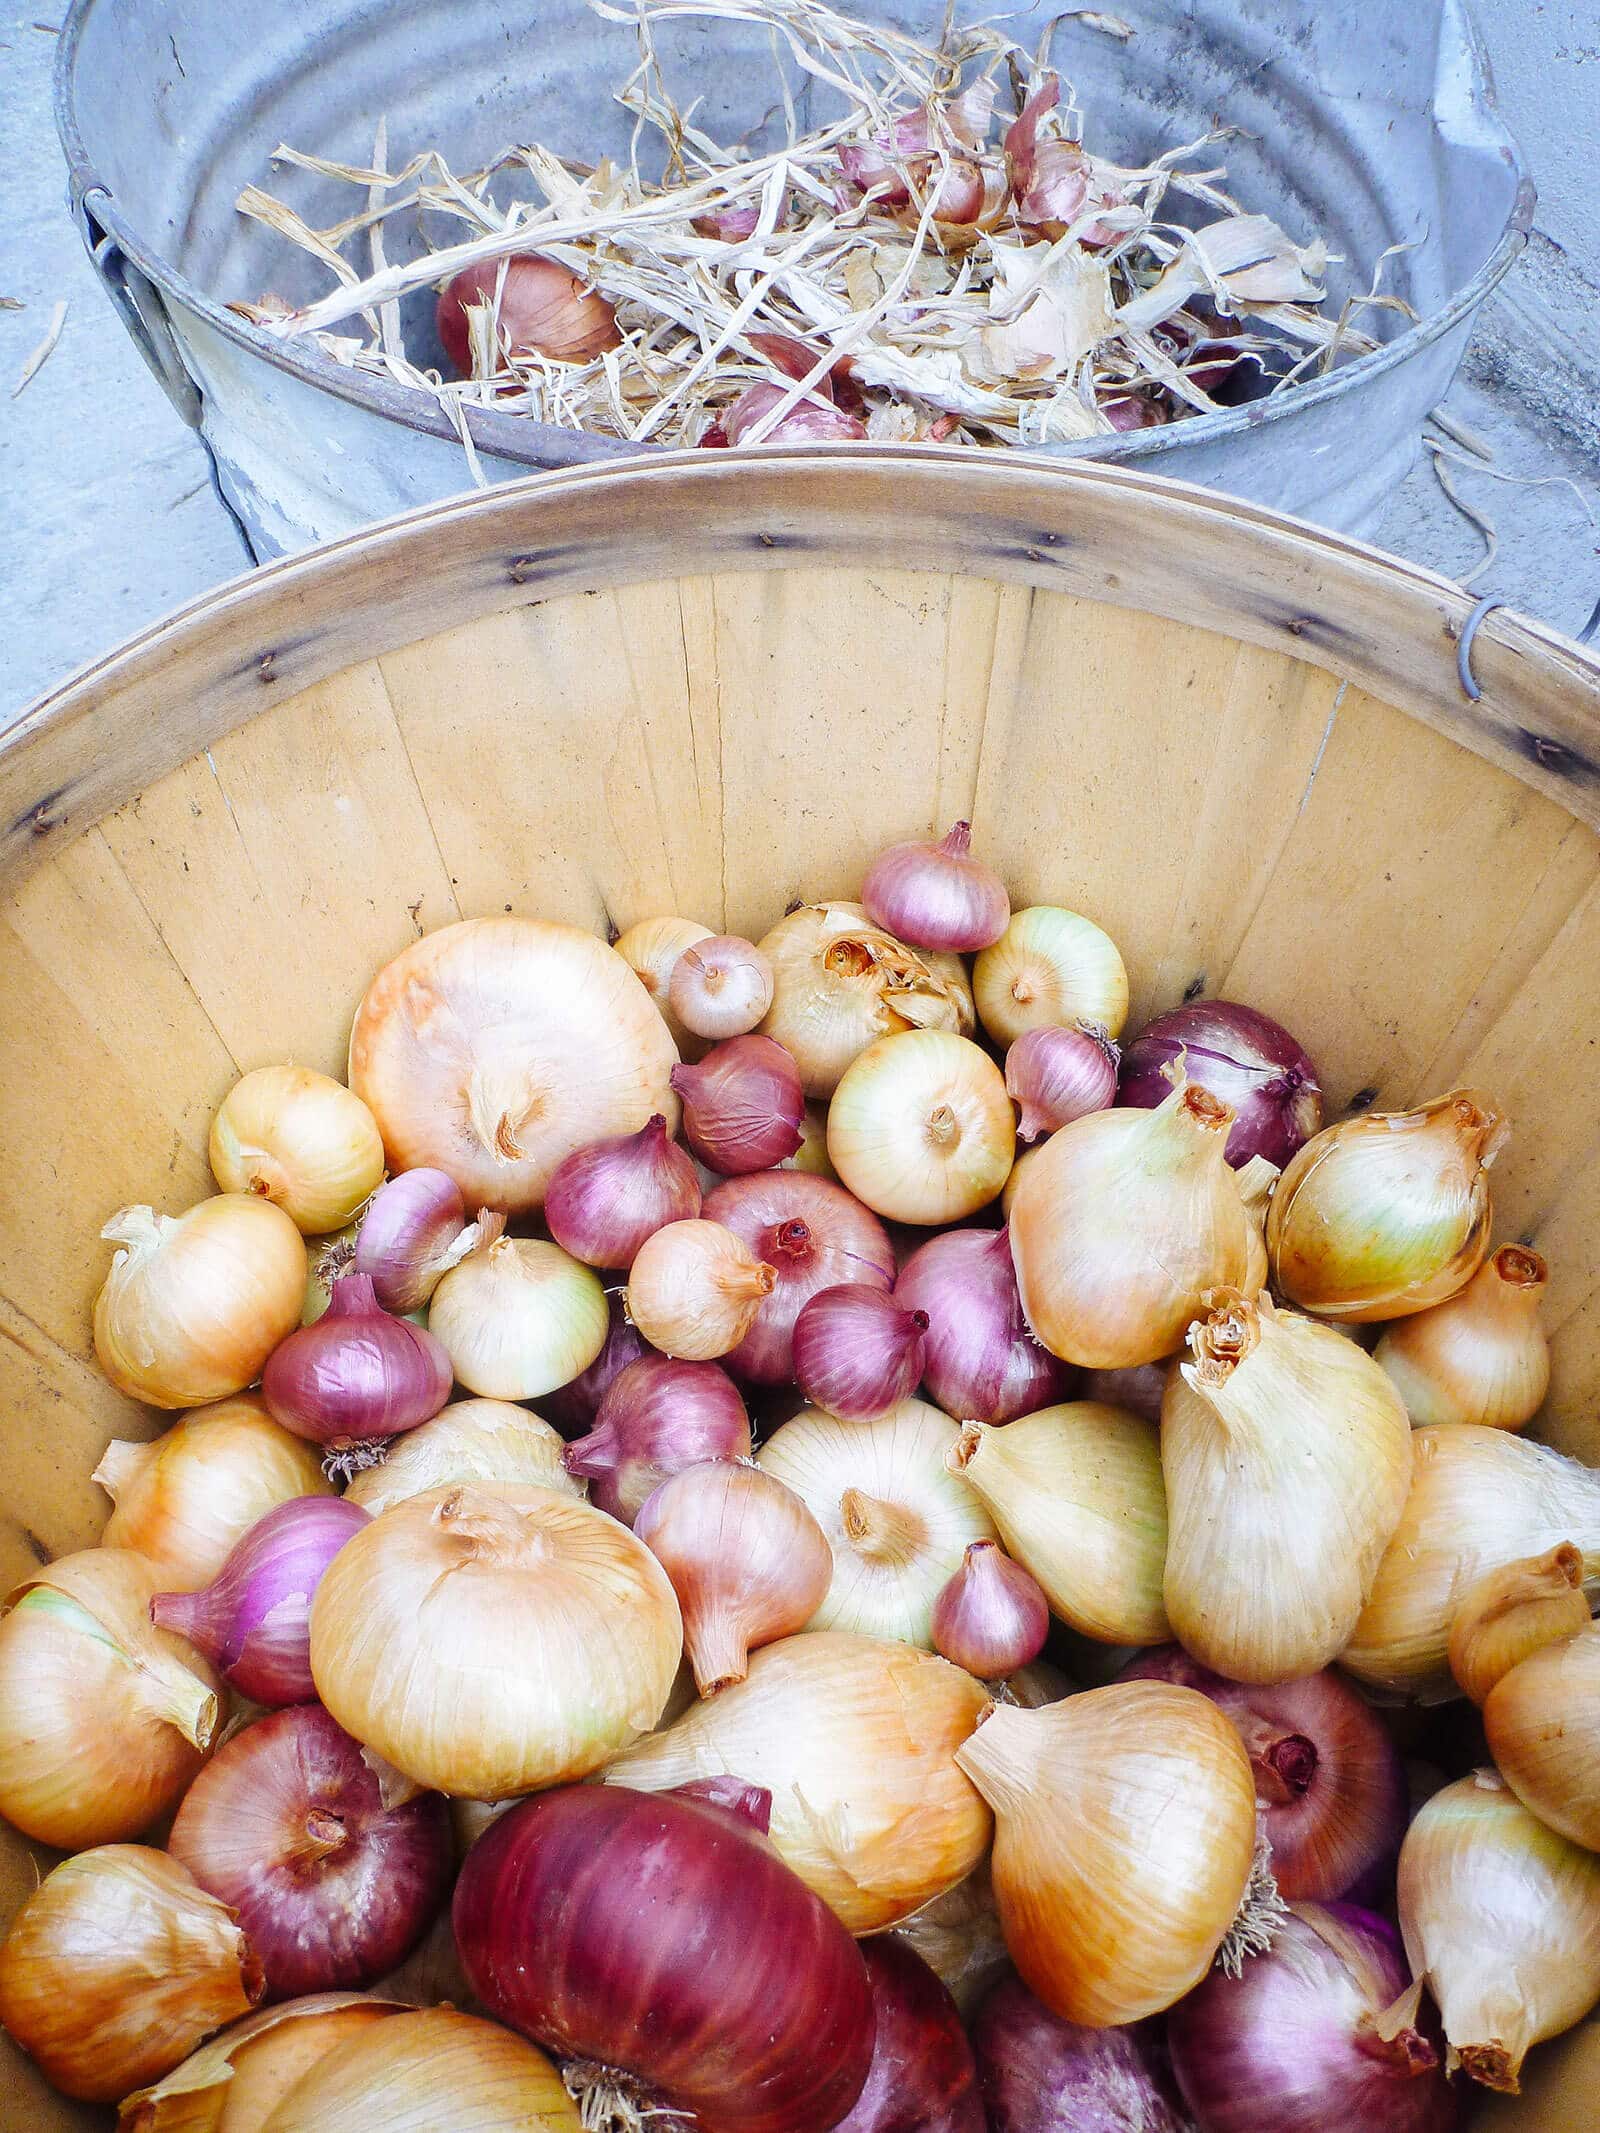 Basket of freshly harvested and cured onions with trimmings in a pail